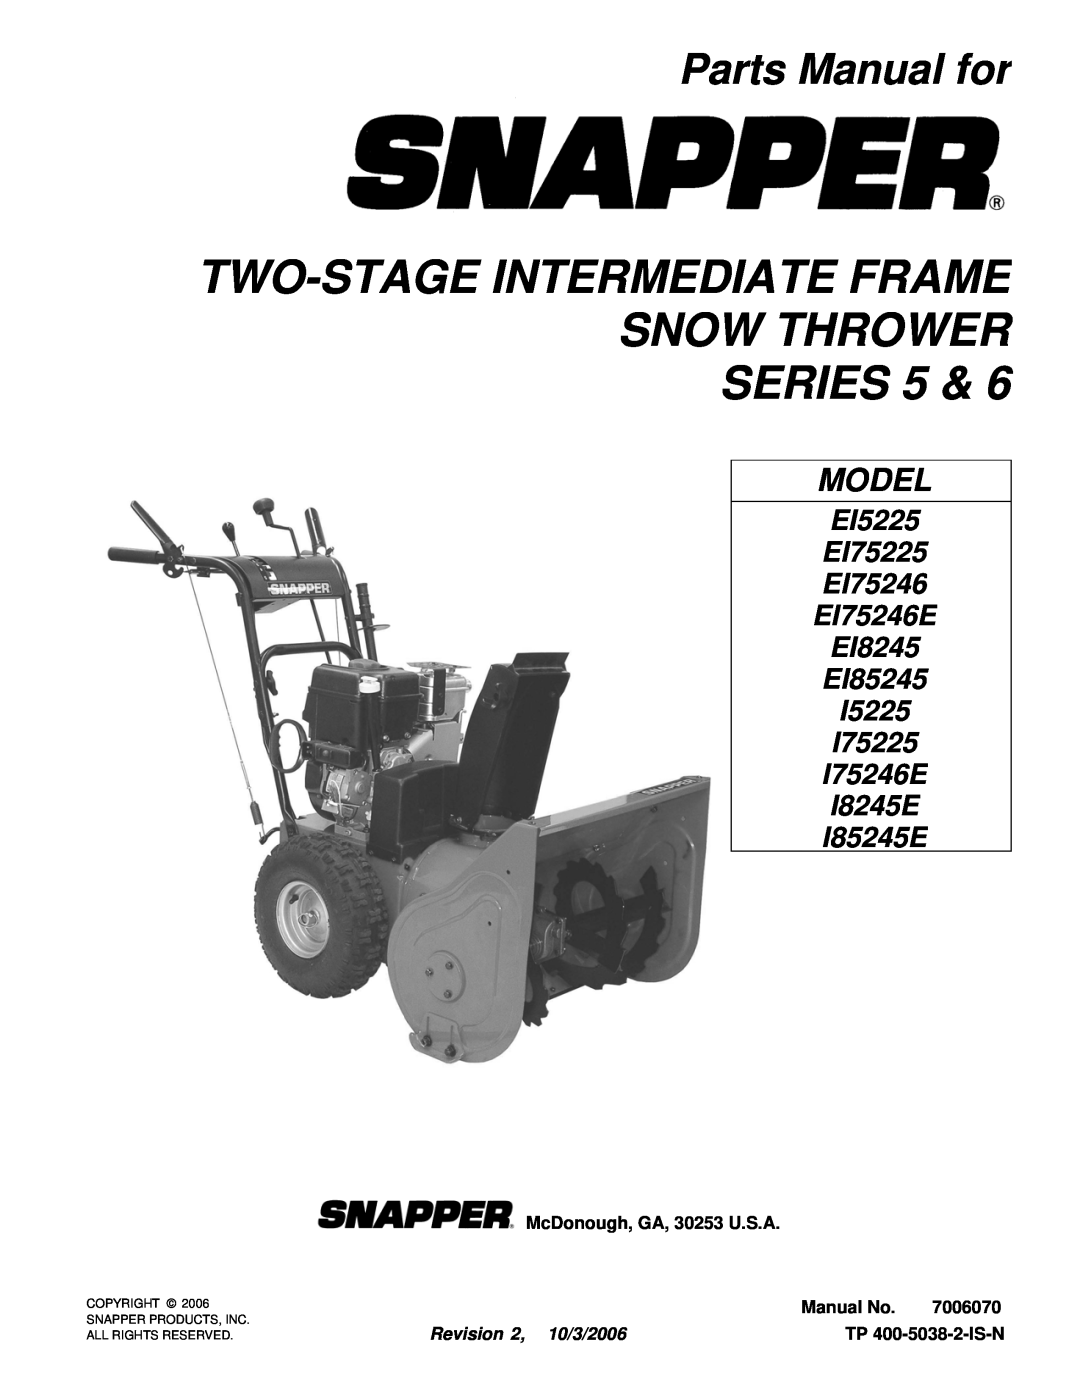 Snapper I85245E manual Two-Stage Intermediate Frame Snow Thrower Series, Parts Manual for, McDonough, GA, 30253 U.S.A 